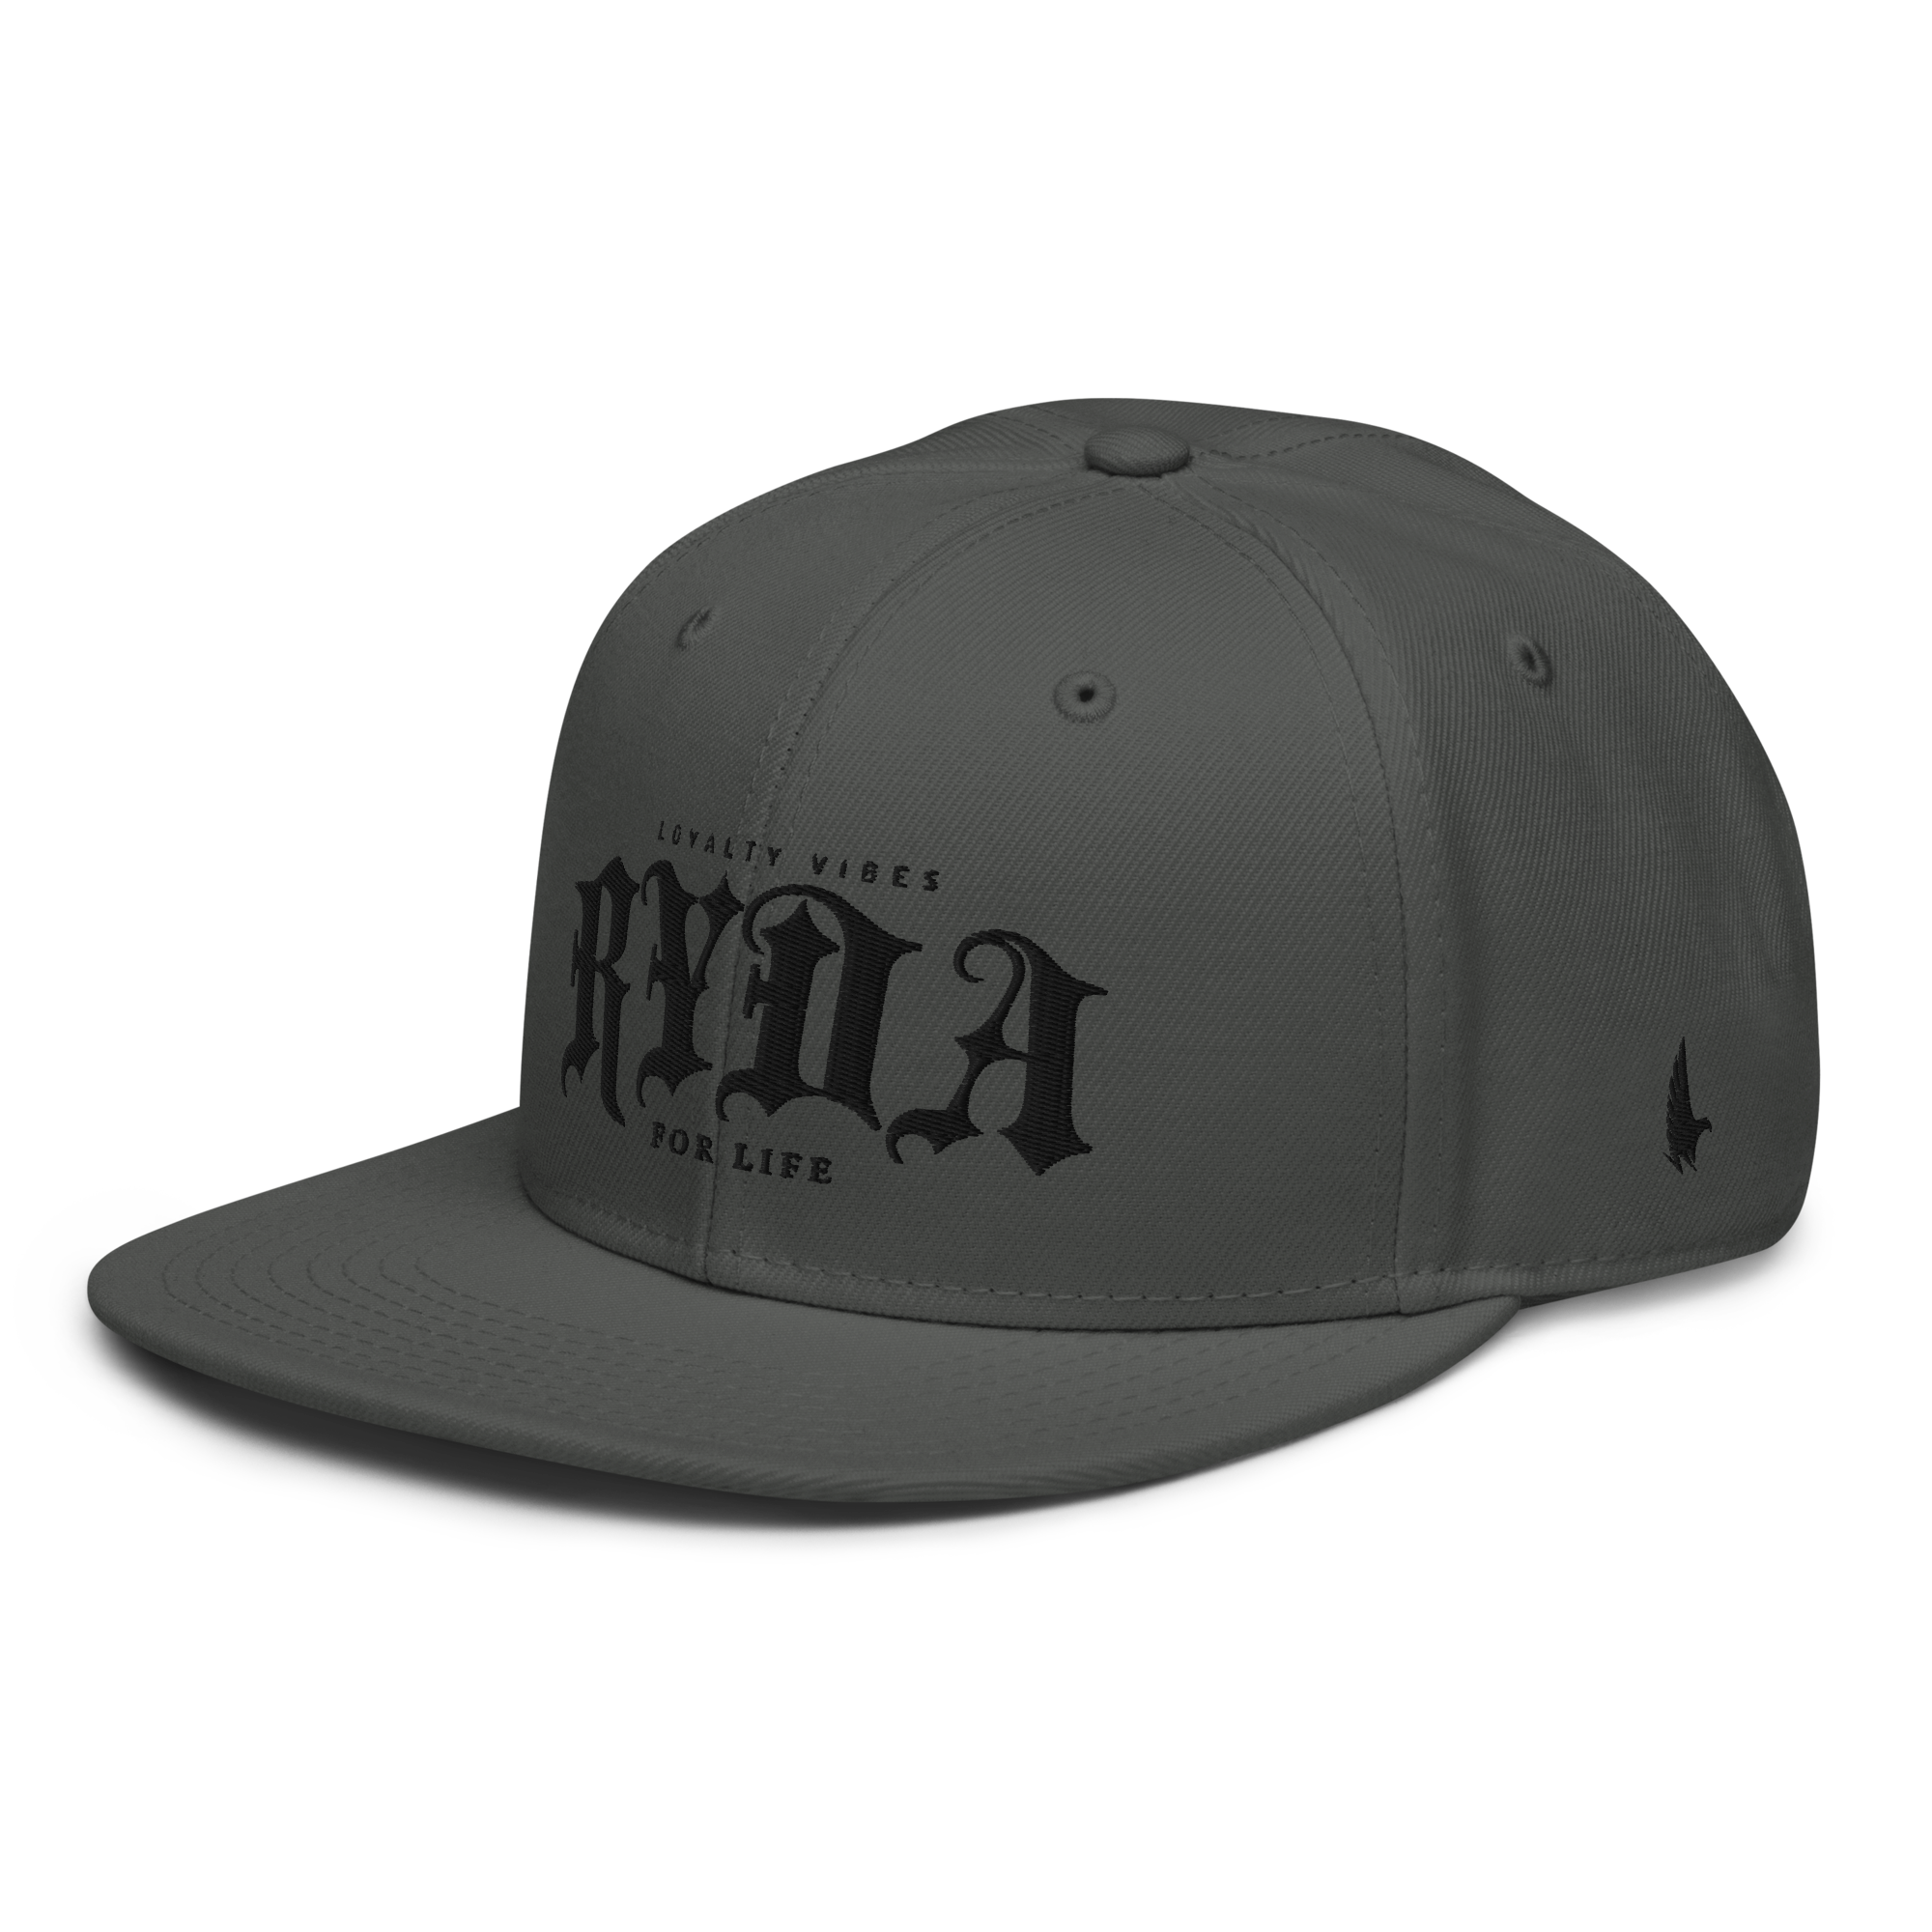 Ryda For Life Snapback Hat - Charcoal Gray - Loyalty Vibes